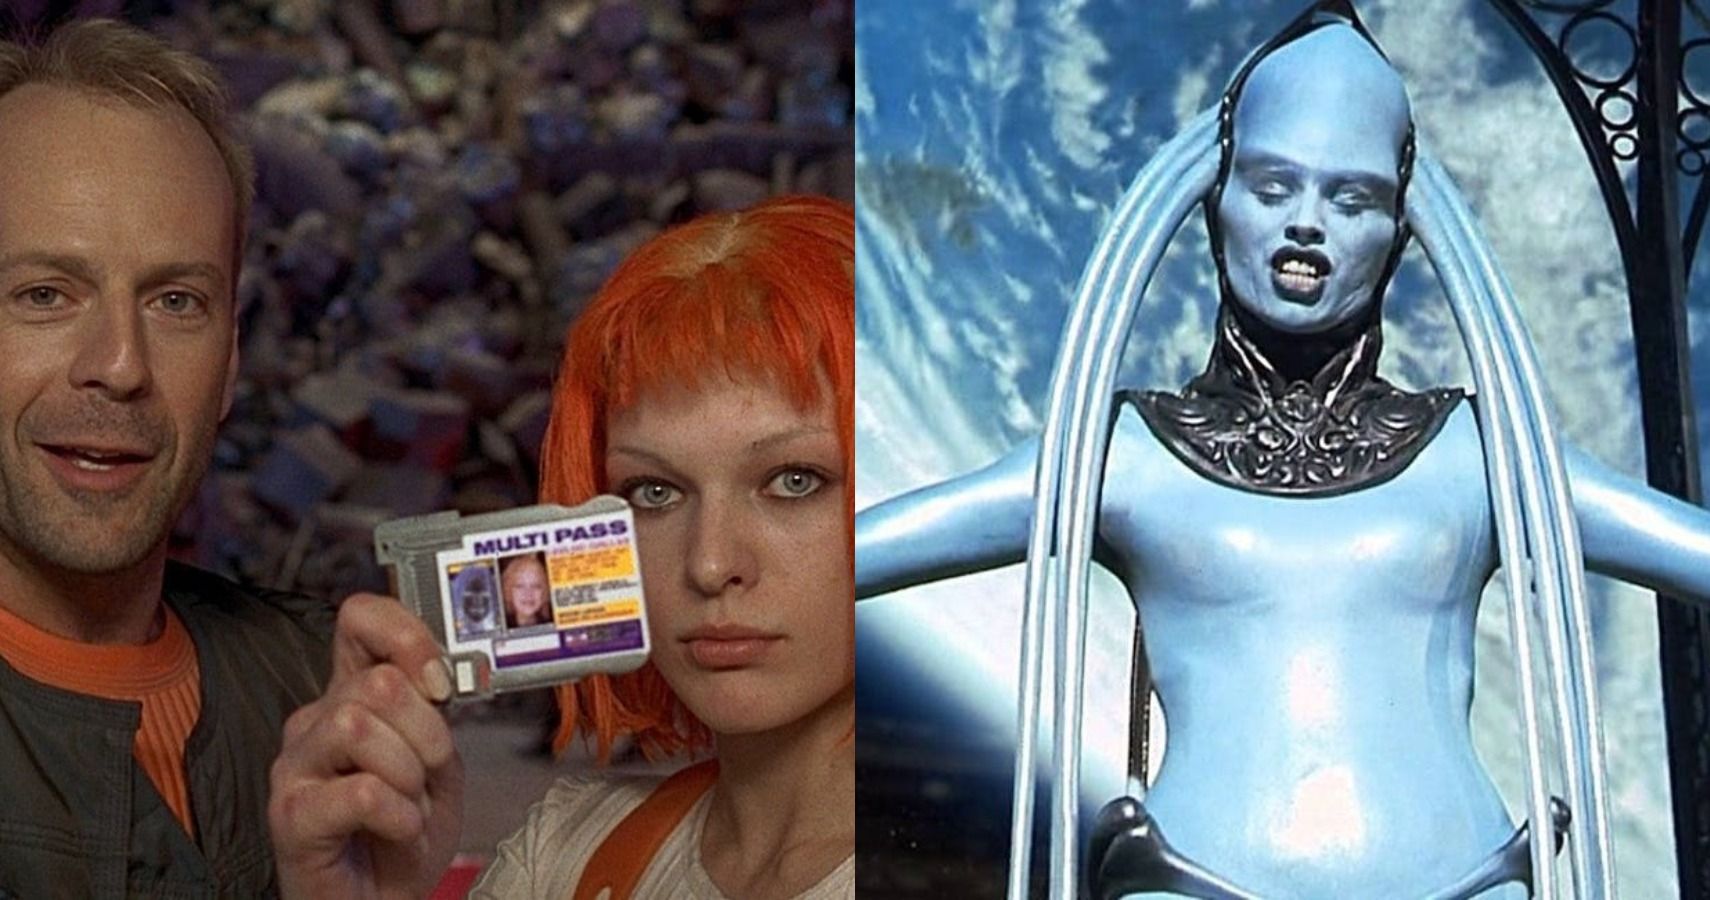 fifth element cast and crew